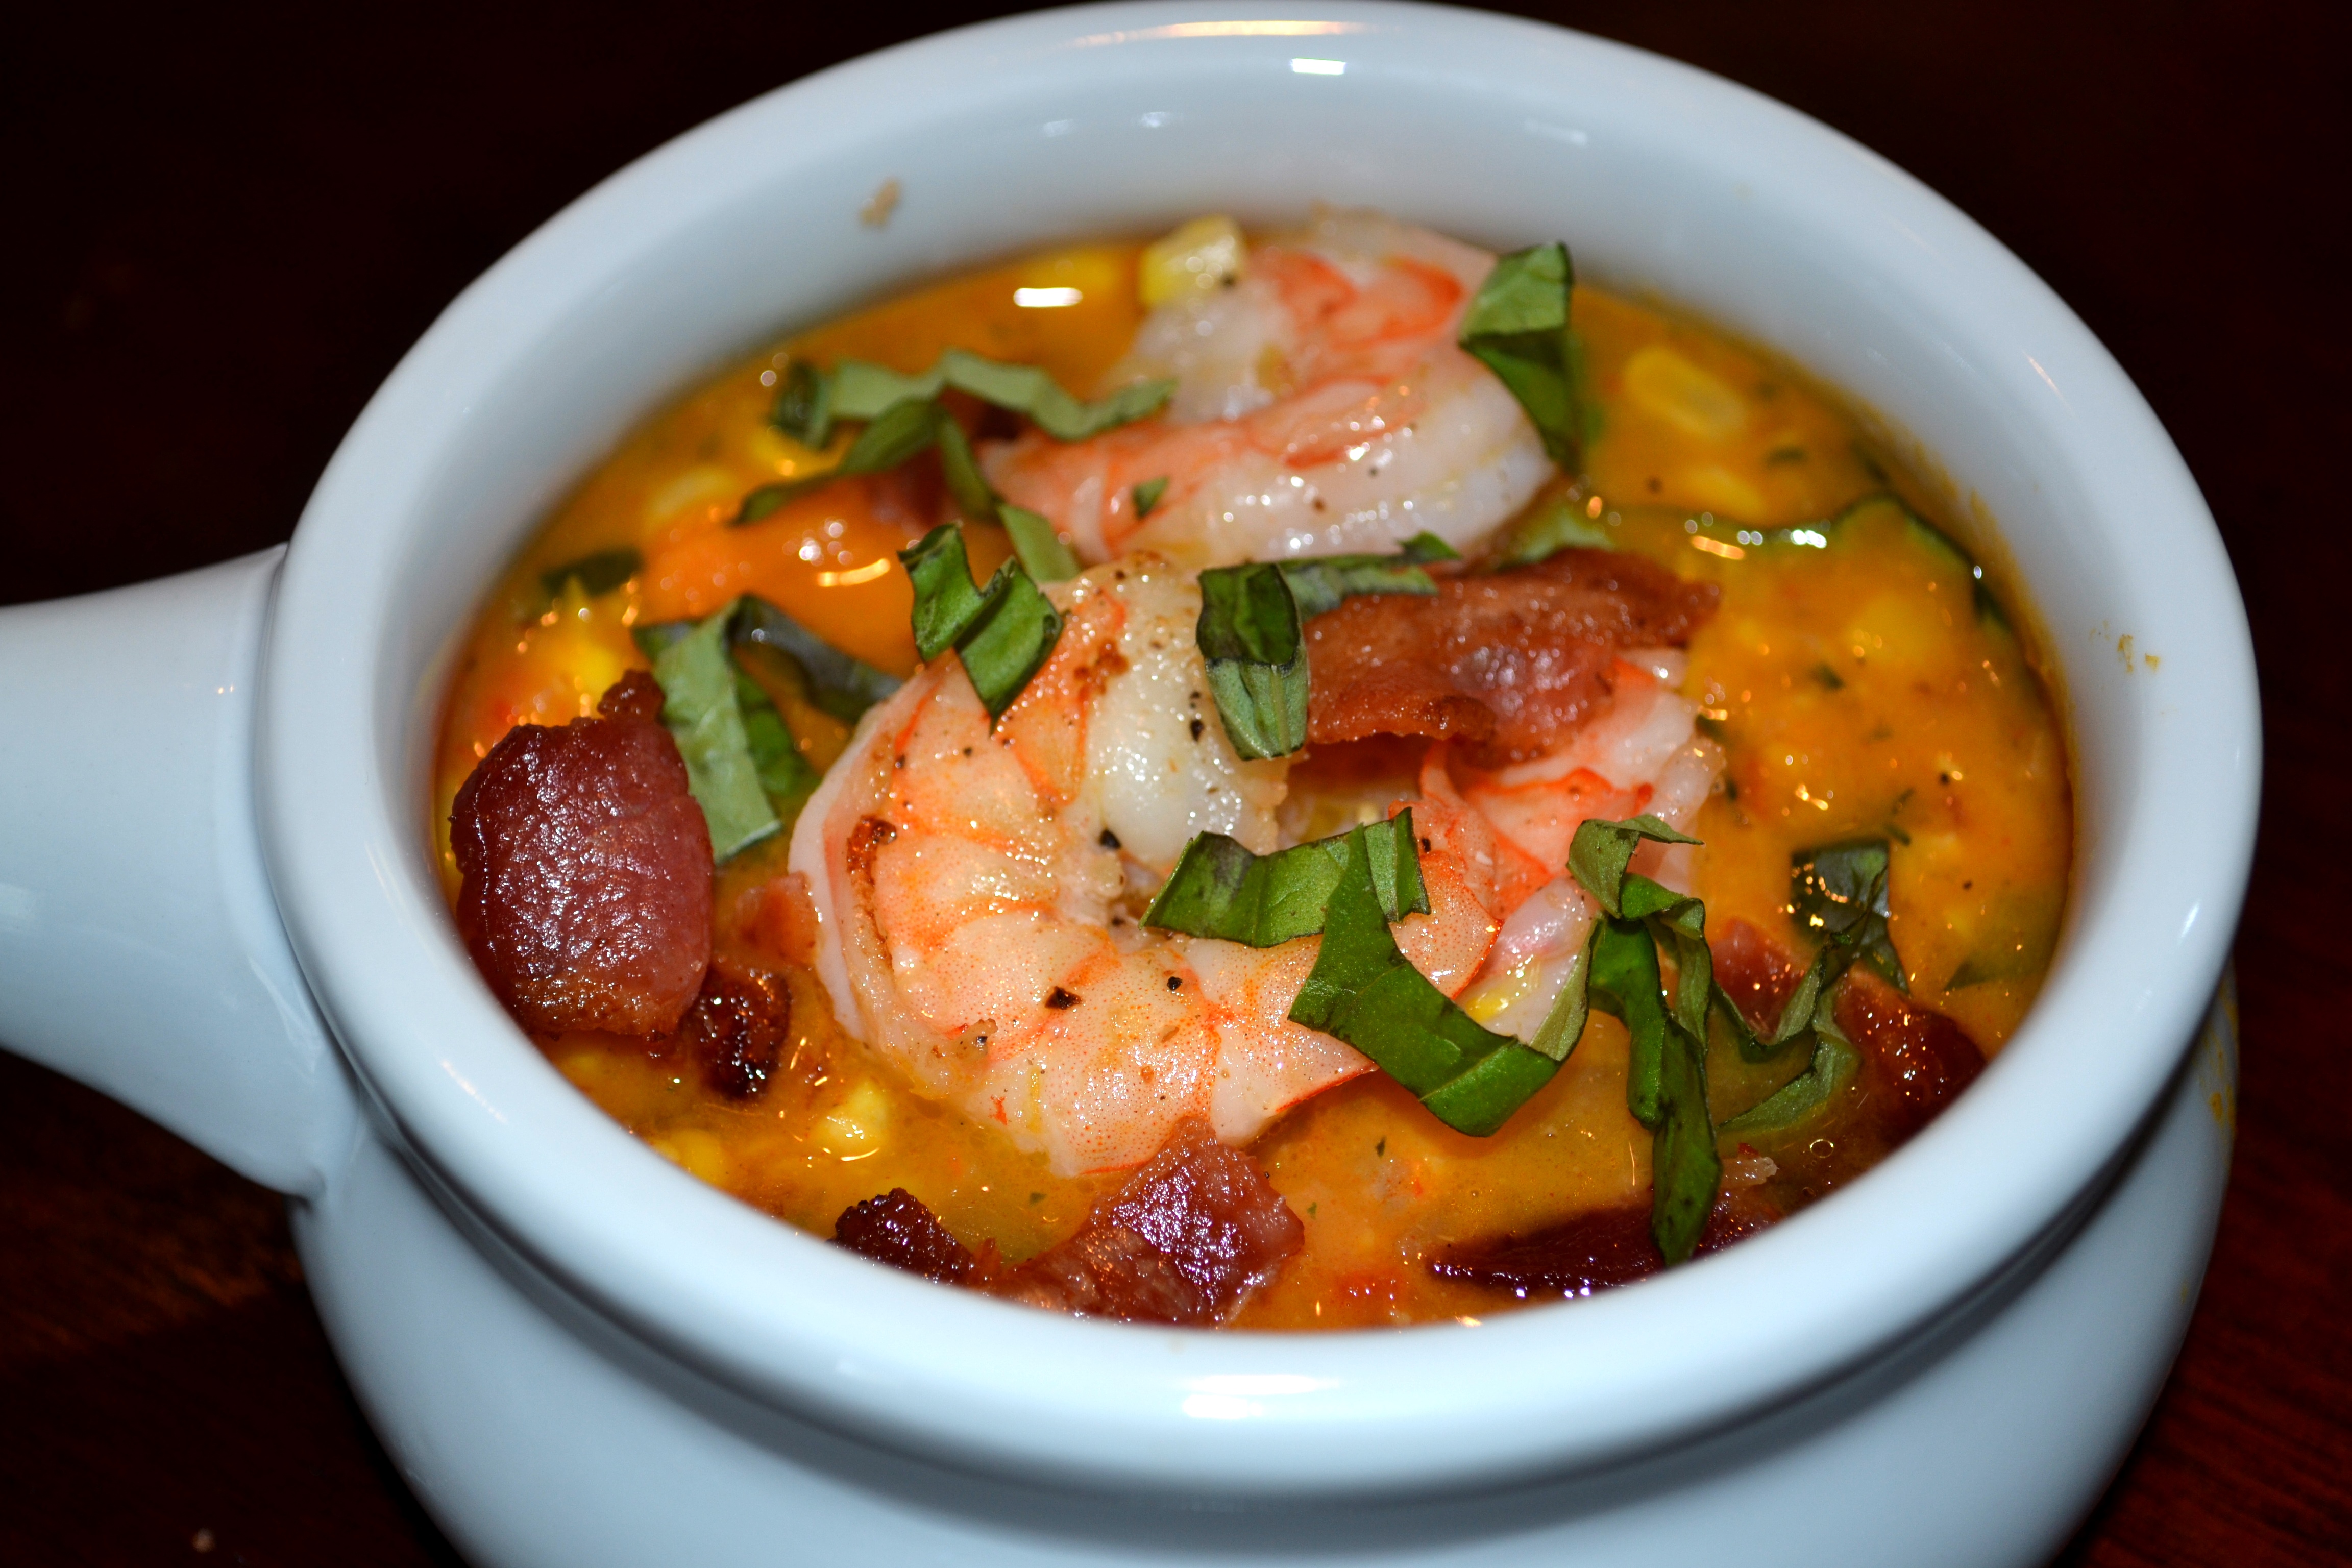 Smoky Corn Chowder with Sweet Potatoes, Shrimp and Applewood Bacon